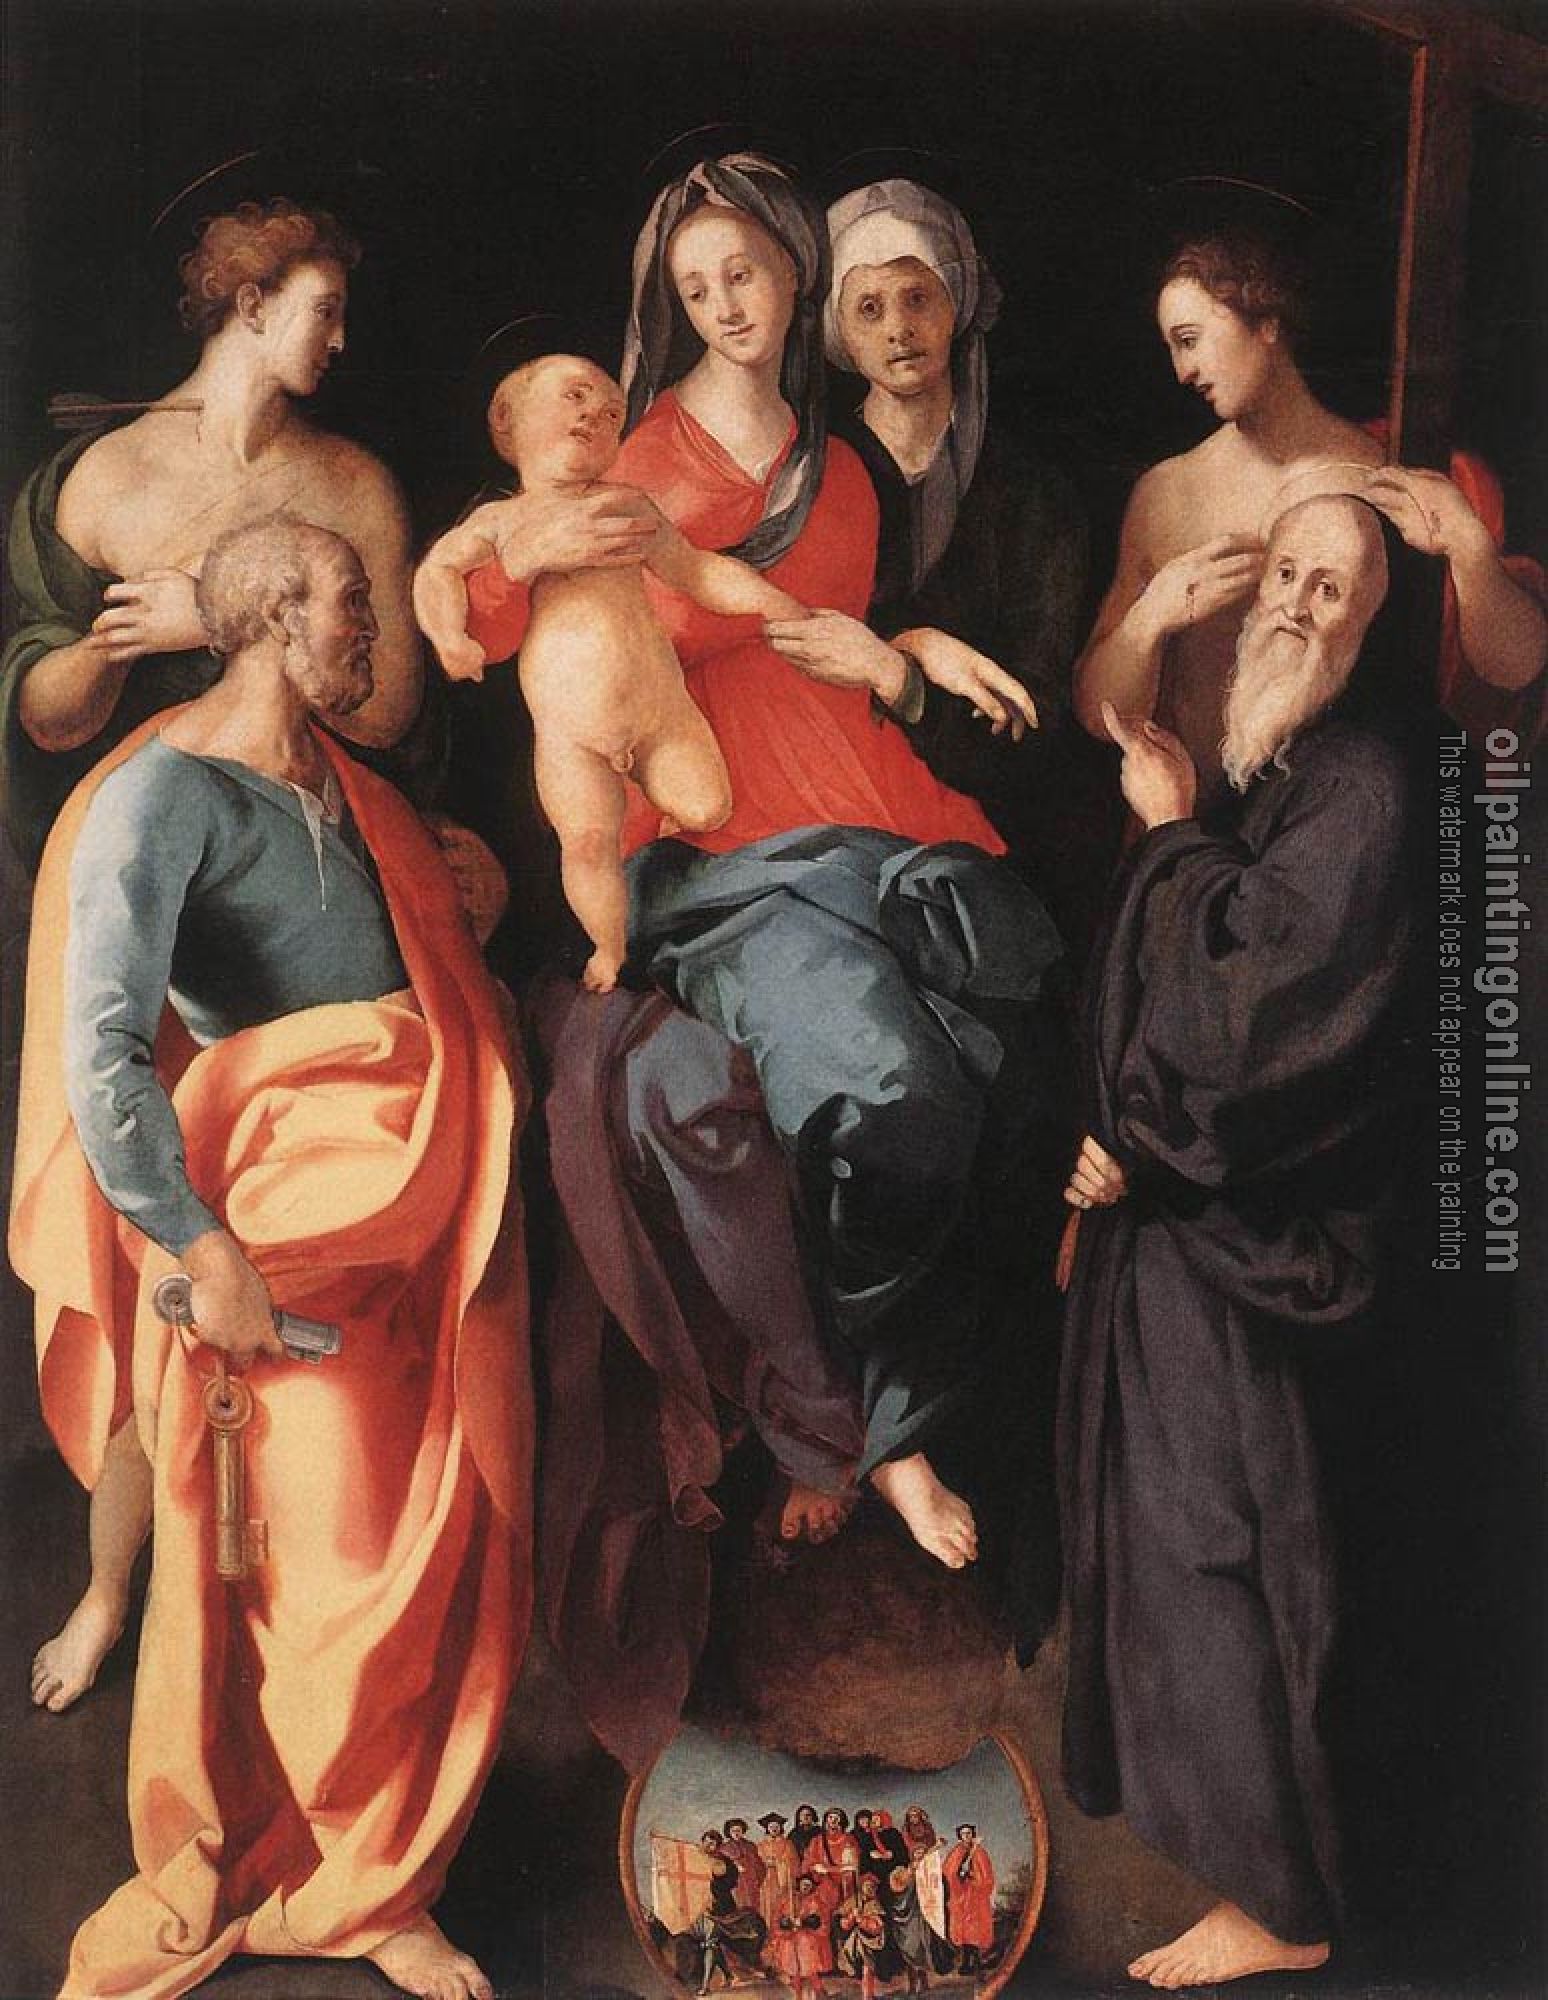 Pontormo, Jacopo da - Madonna And Child With St Anne And Other saints